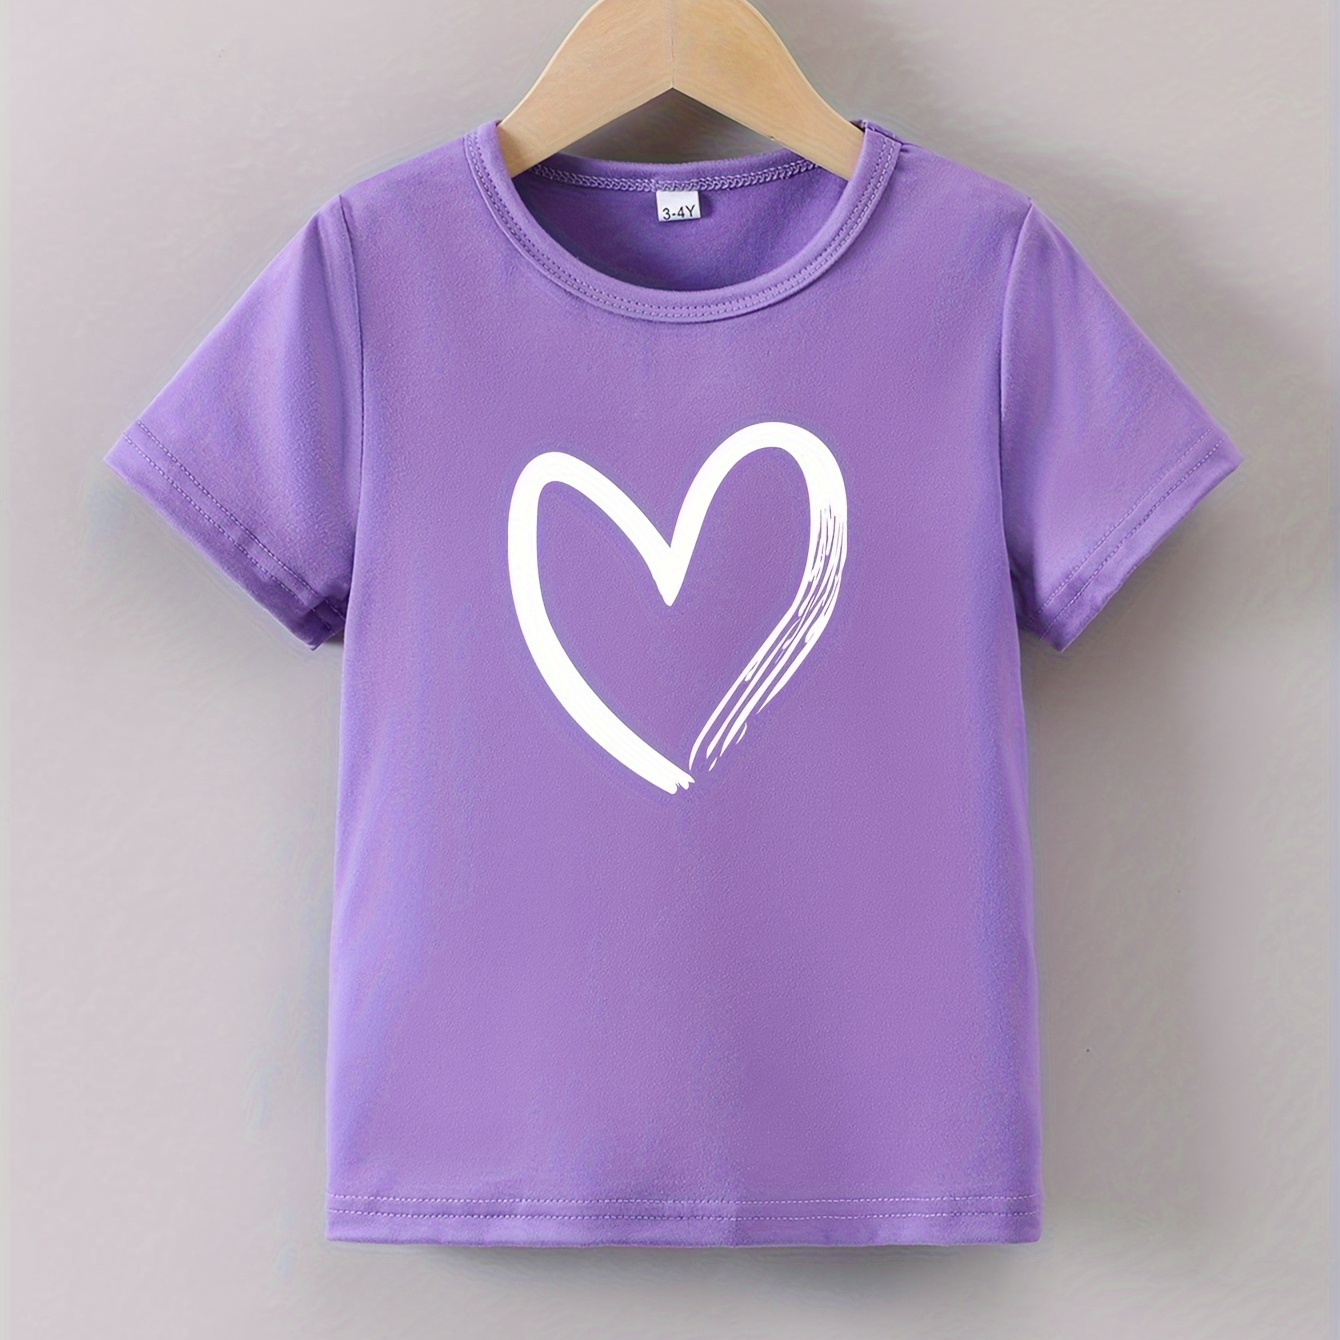 

Heart Sketch Graphic Print For Girls, Casual Crew Neck Short Sleeved T-shirt, Comfy Top Pullover For Spring And Summer For Exercise